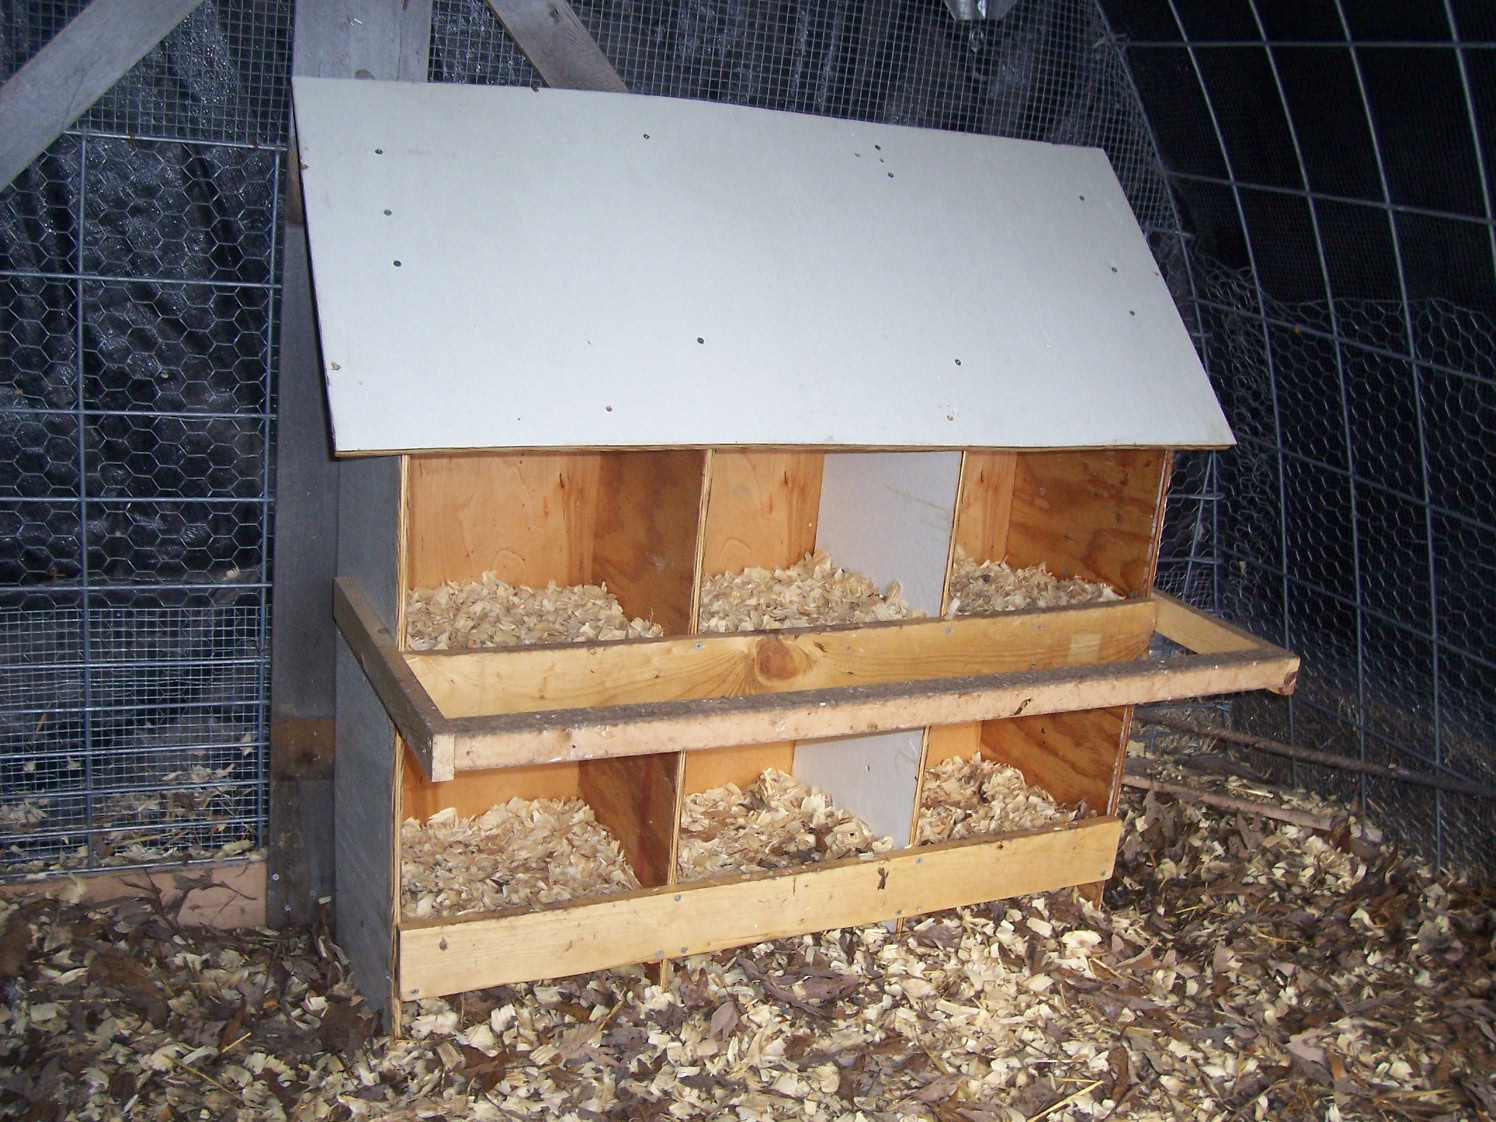 DIY Nesting Boxes For Chickens
 Joe s Garden Journal A Low cost easy to build chicken